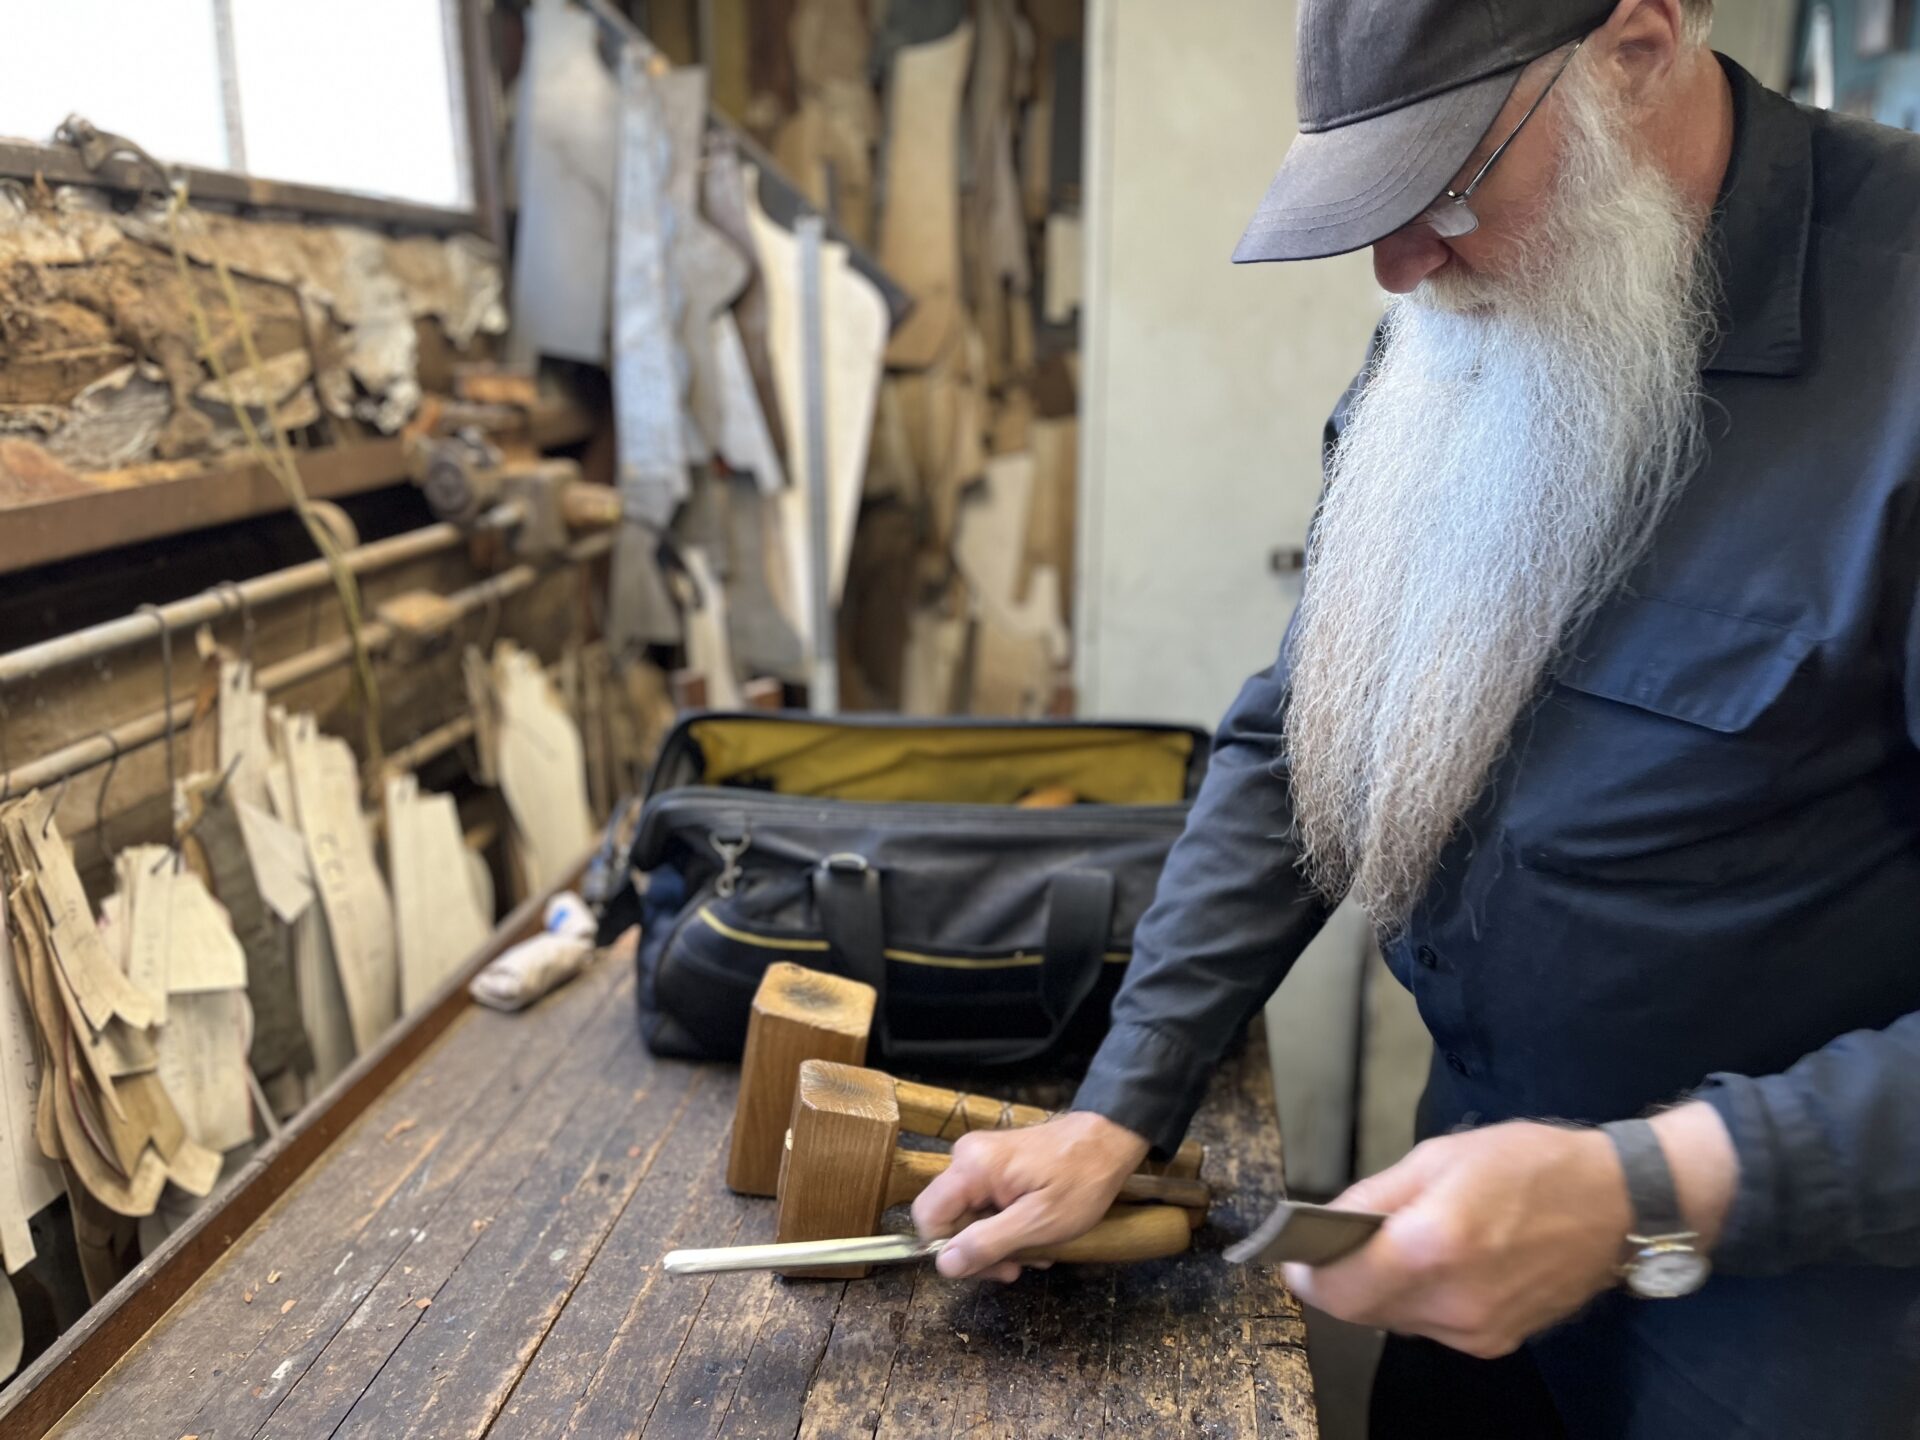 An older factory worker with a long white beard lays out wood carving tools on a brown table.